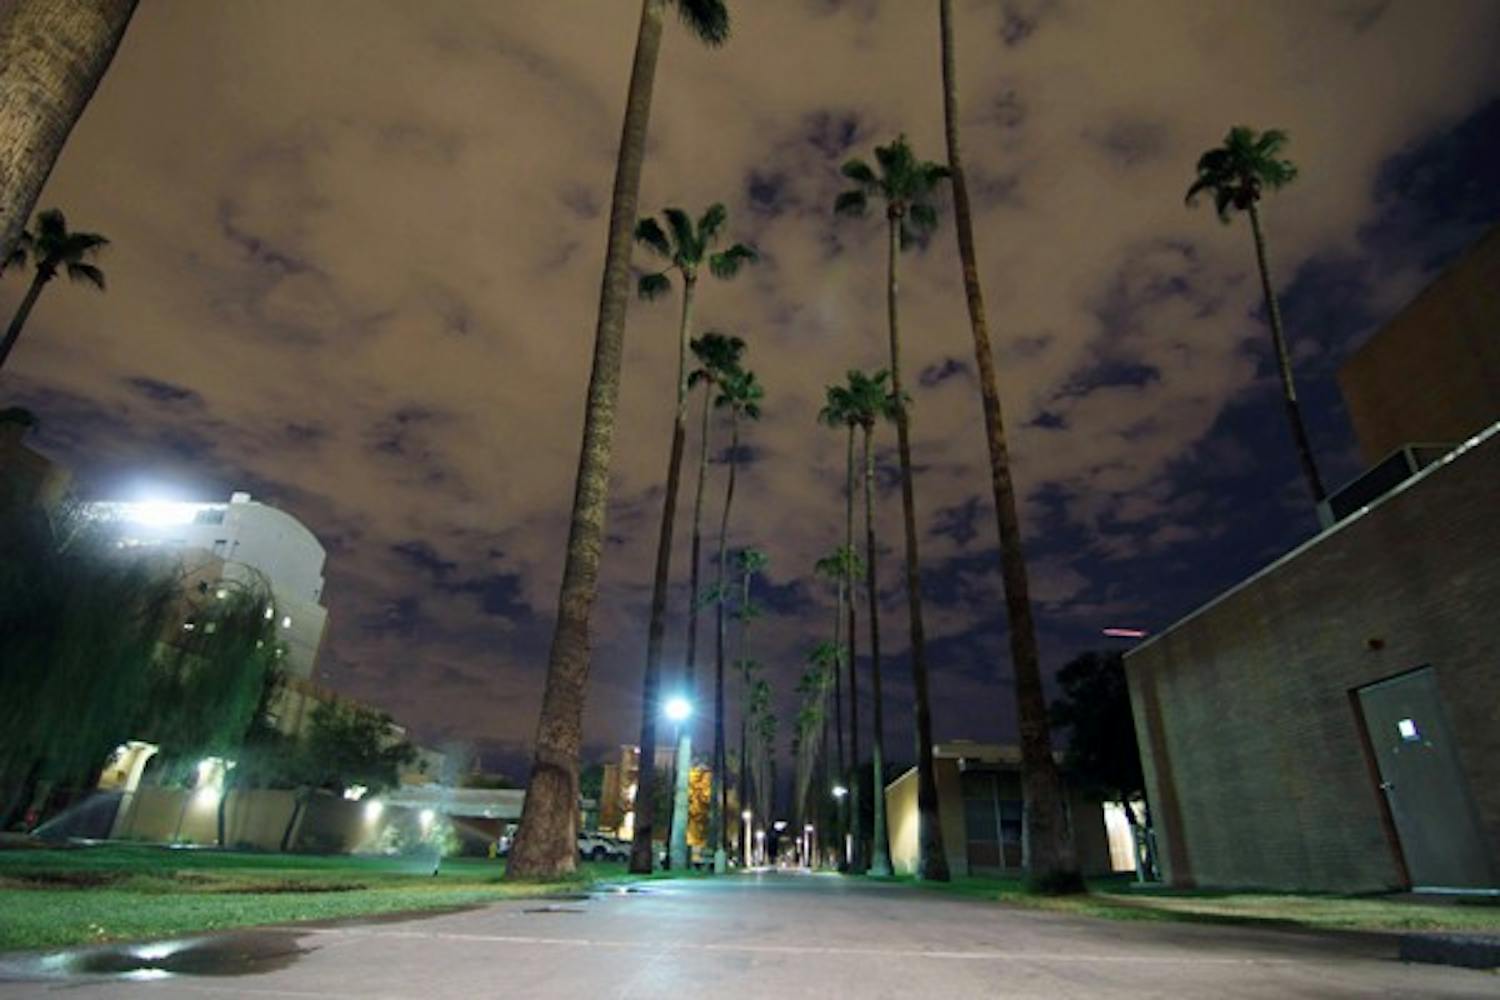 SEA OF WHITE: Clouds glow over Palm Walk on Tempe campus late Tuesday night. (Photo by Lisa Bartoli)